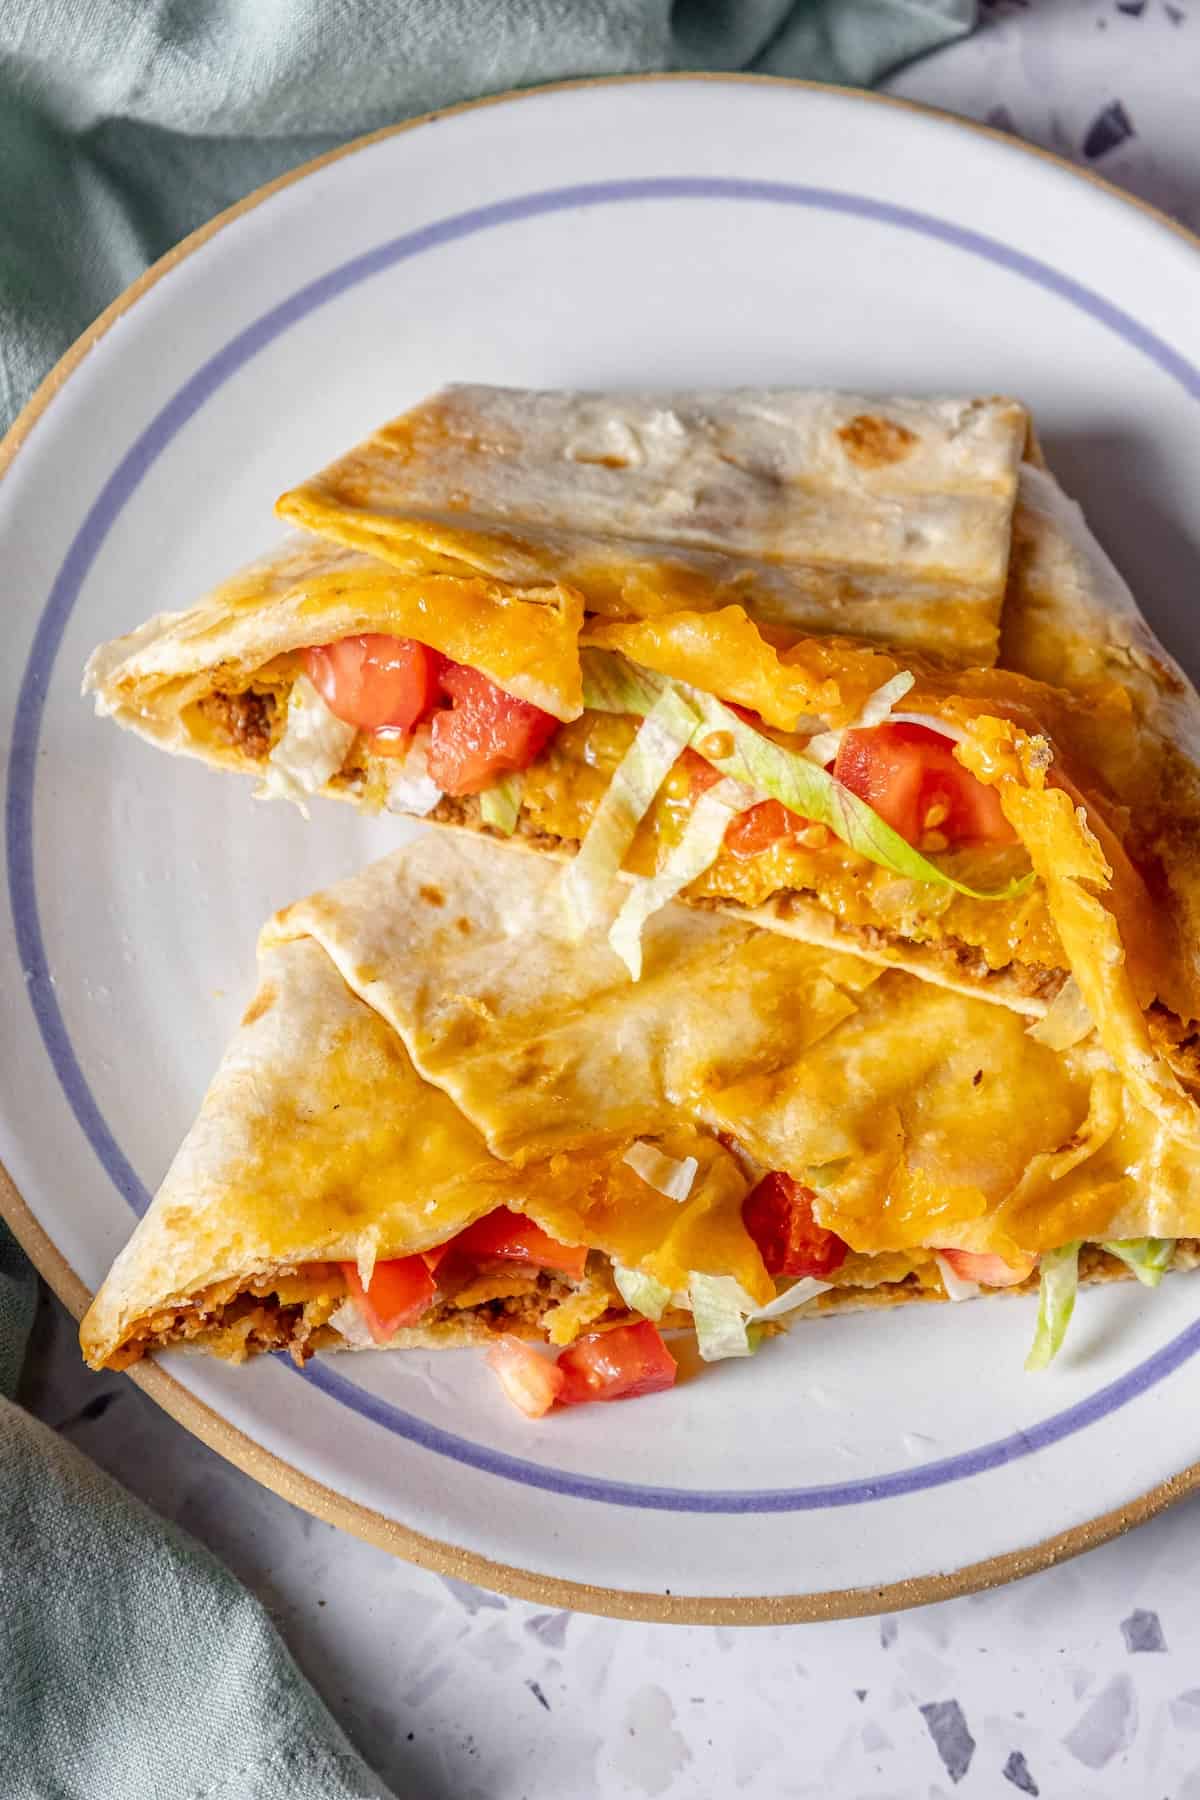 Homemade chicken quesadilla on a plate.